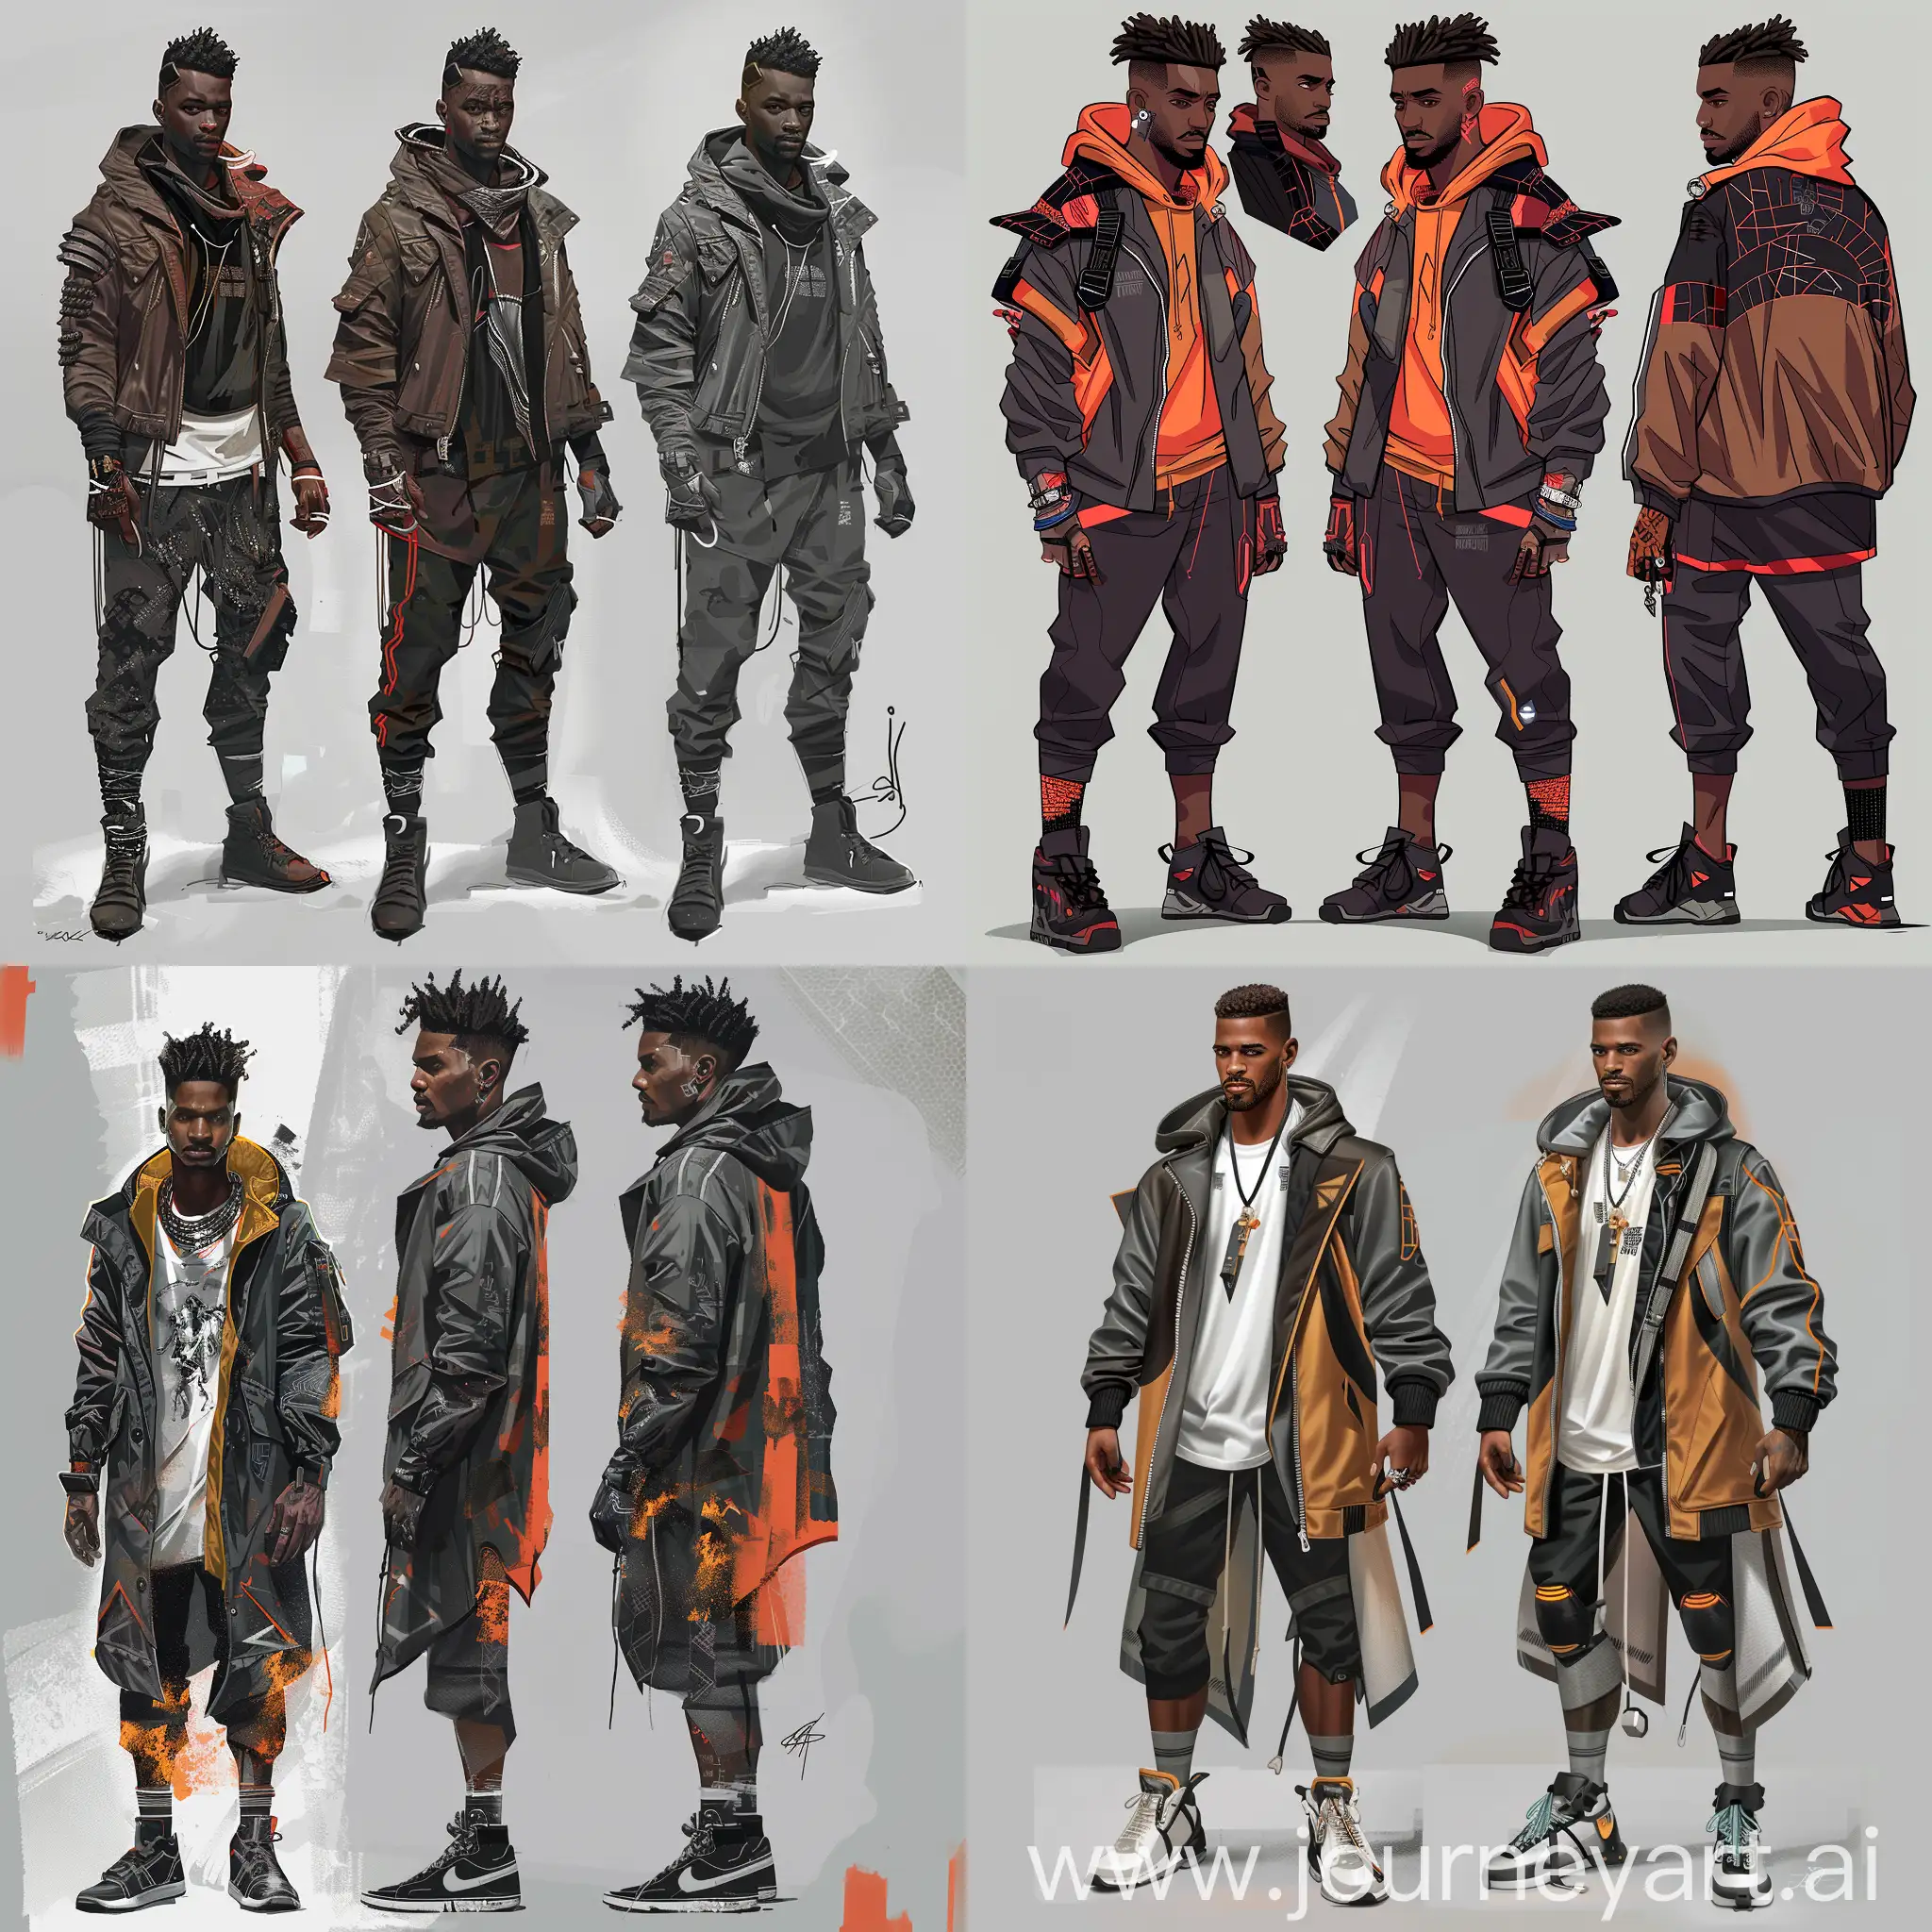 A black man as a urban ninja. He must be dressed in modern clothes but styled like a rogue in a fantasy. Wears a stylish designer jacket as well. Tech-wear street fashion. Character turn around sheet.